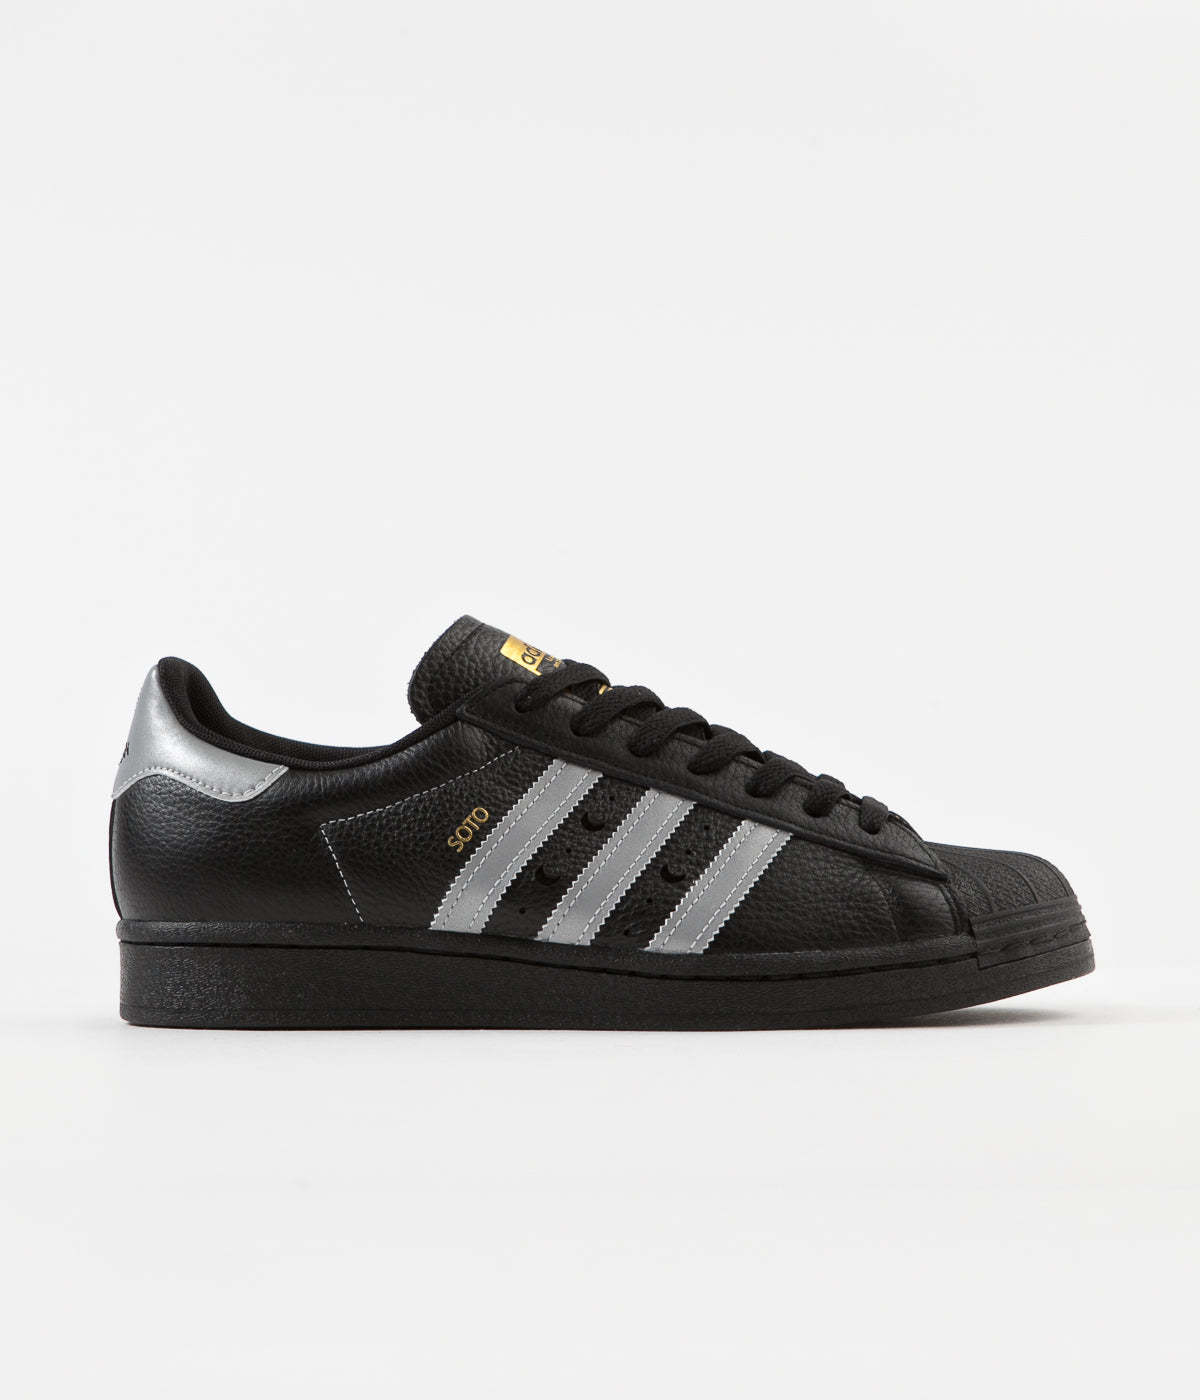 adidas superstar without gold